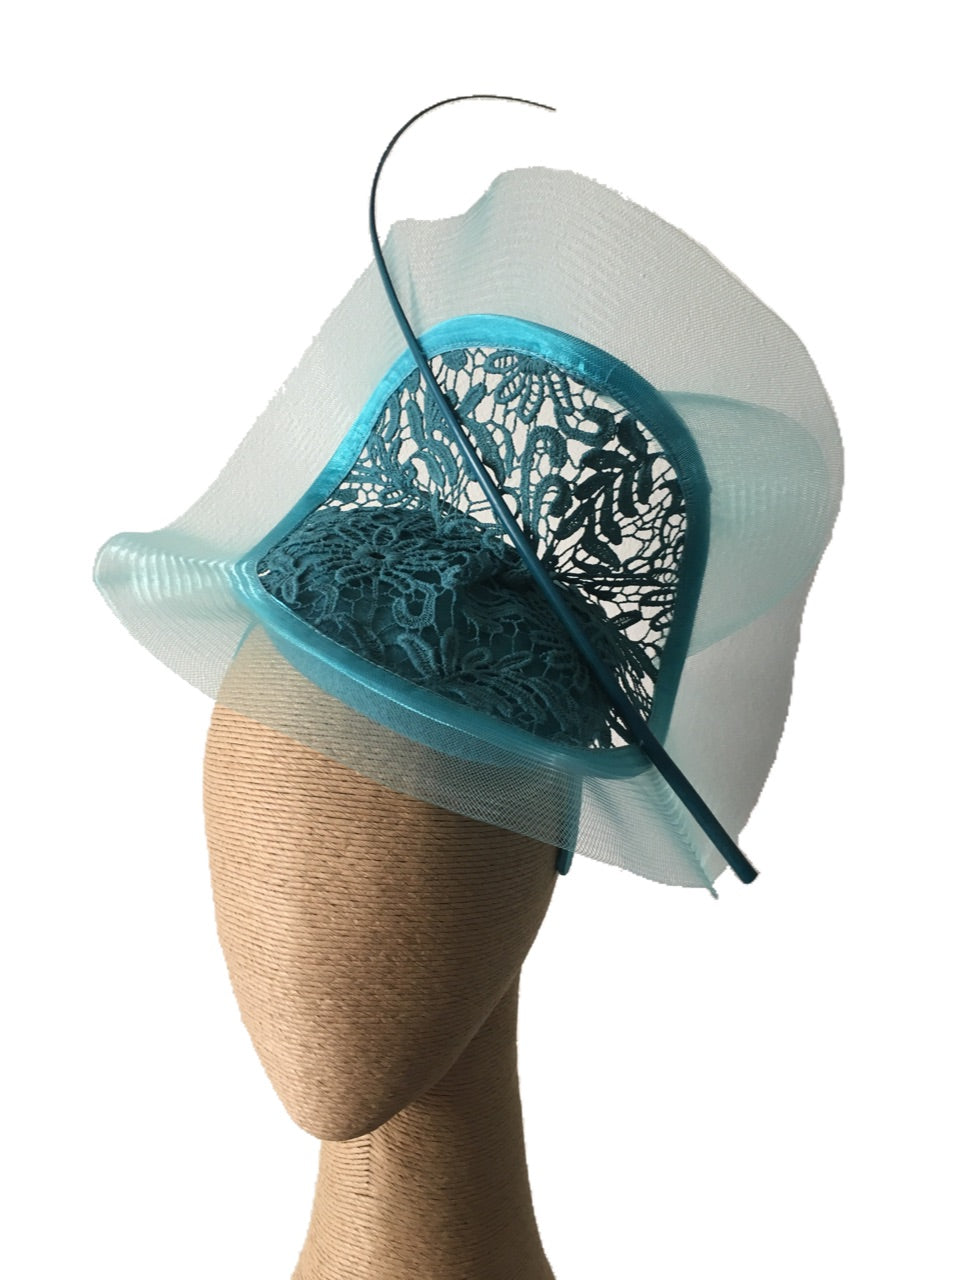 Morgan & Taylor Margo Felt Base Fascinator with Lace in Teal